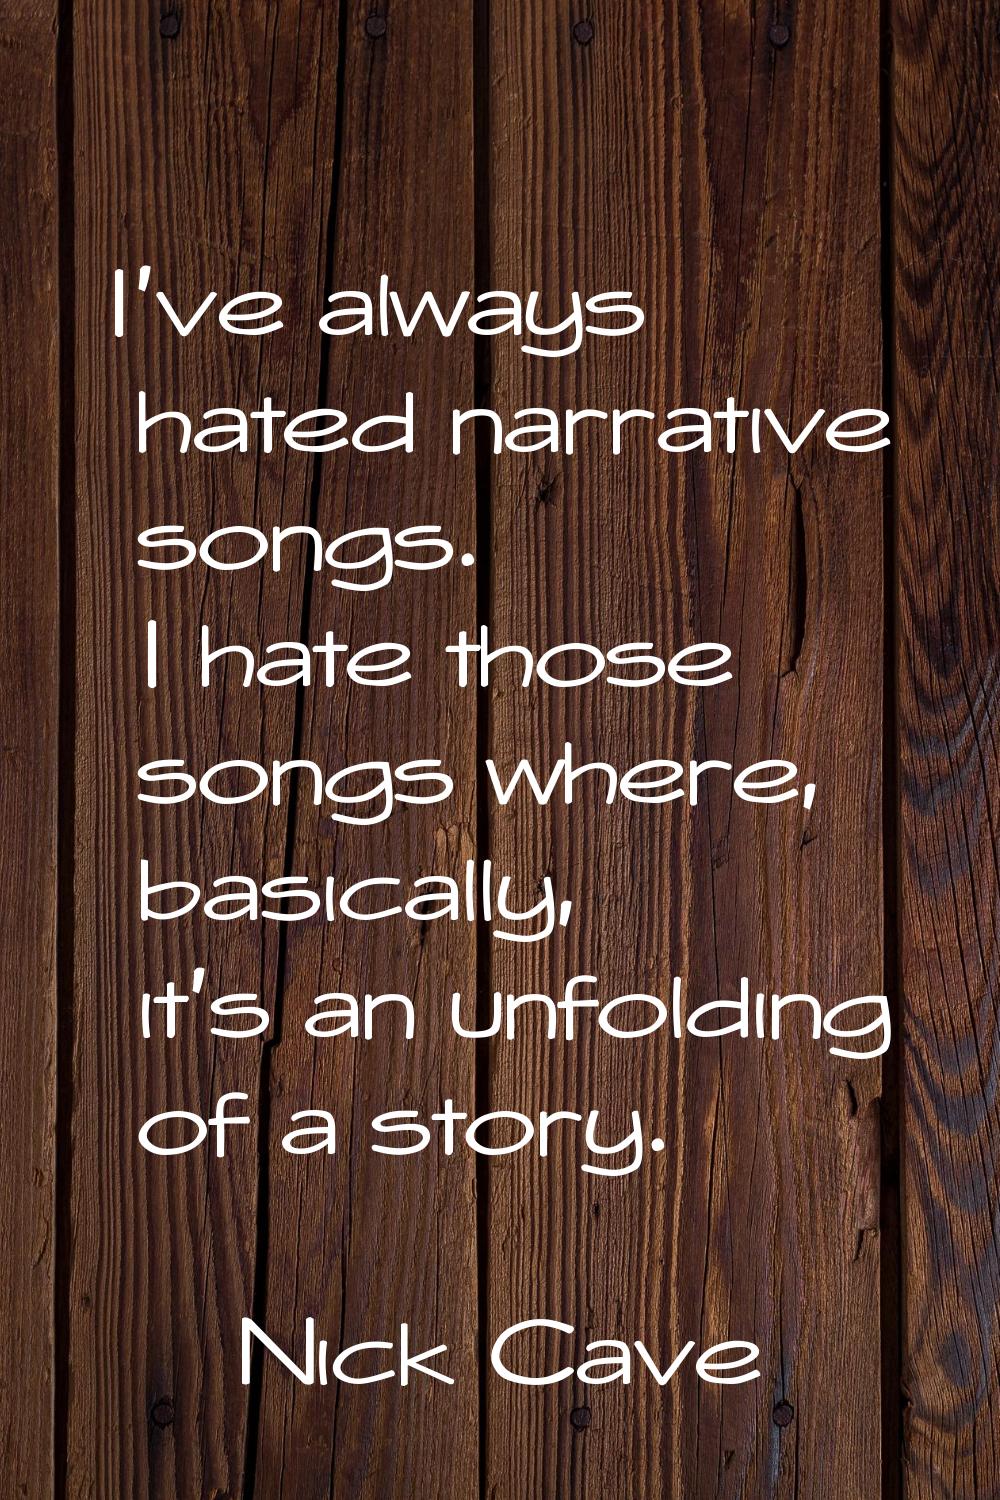 I've always hated narrative songs. I hate those songs where, basically, it's an unfolding of a stor